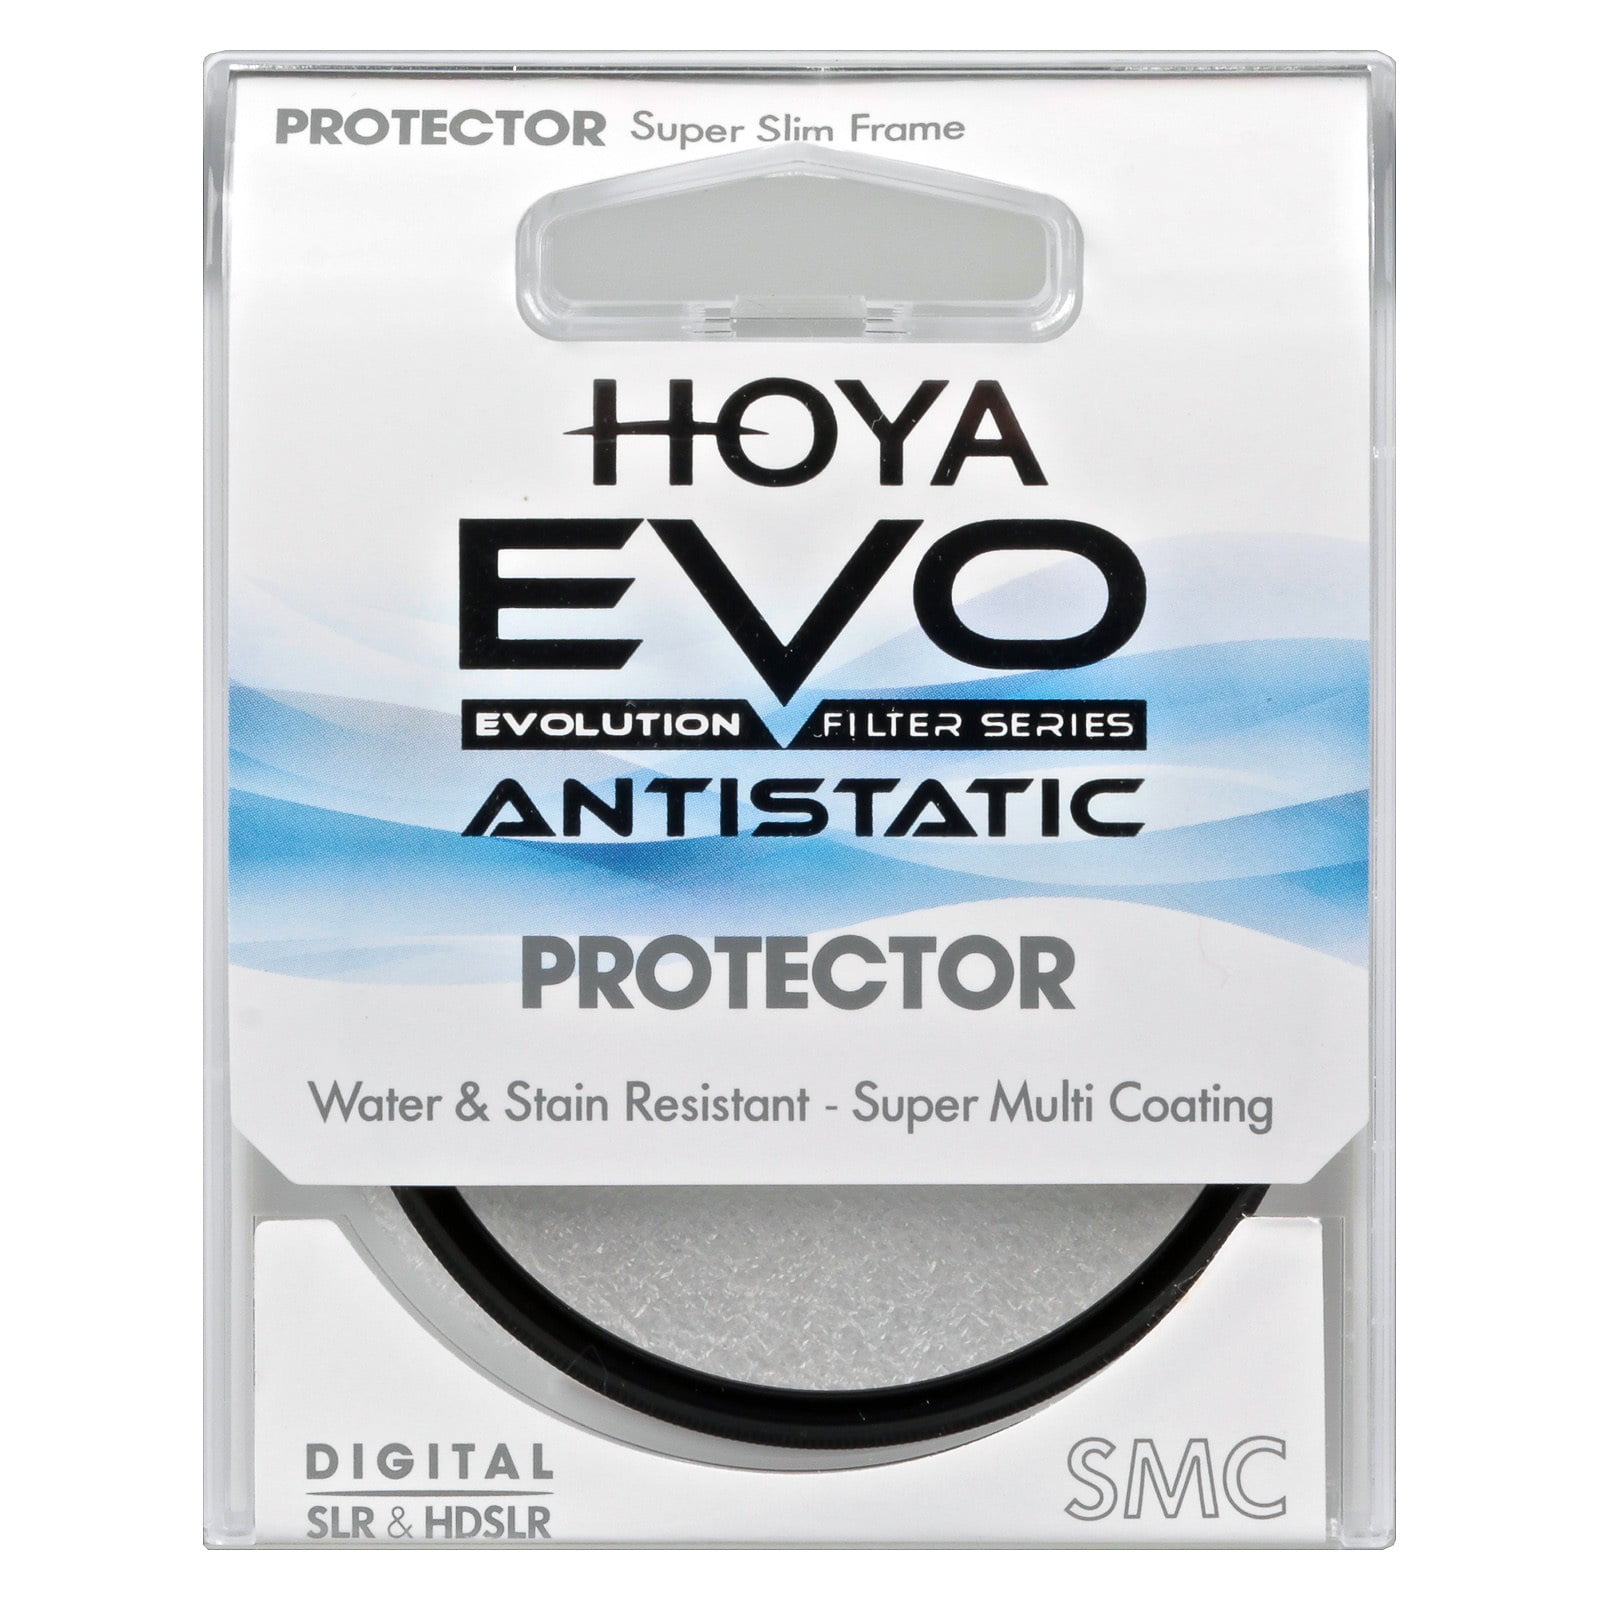 Low-Profile Filter Frame 62mm Hoya Evo Antistatic Protector Filter Dust/Stain/Water Repellent